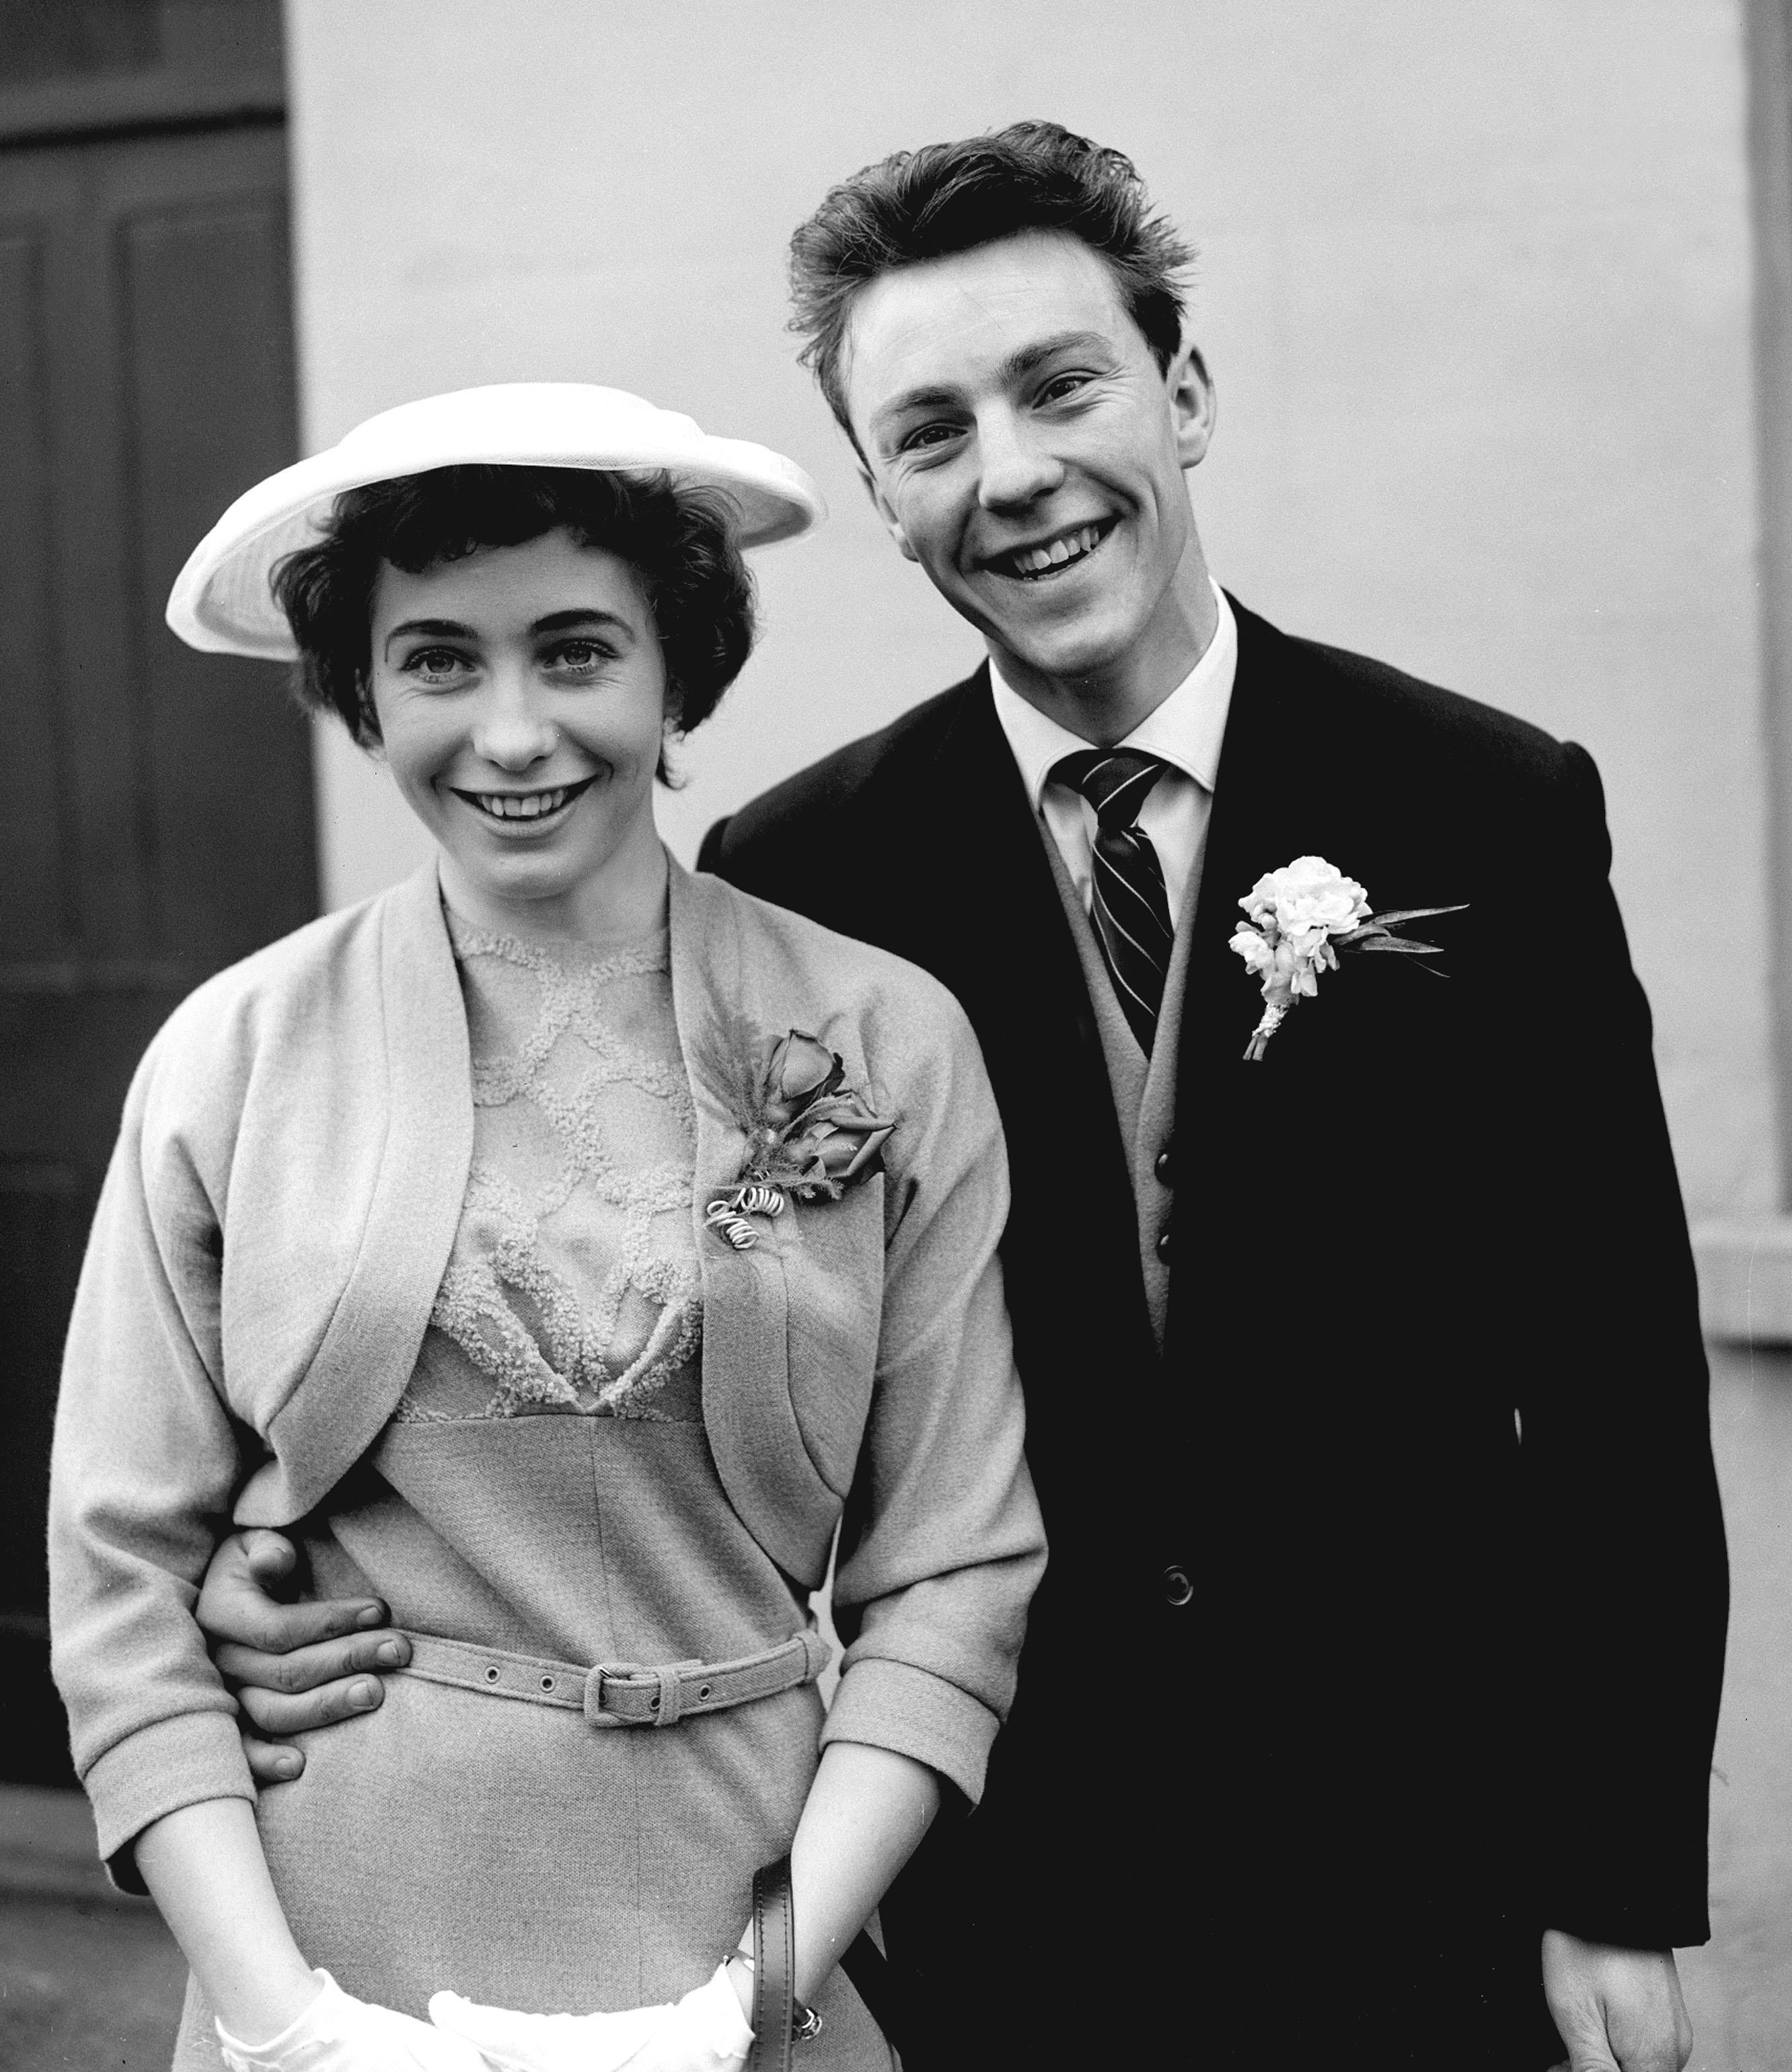 Jimmy Greaves, aged 18, with his bride Irene Barden after their wedding (PA)